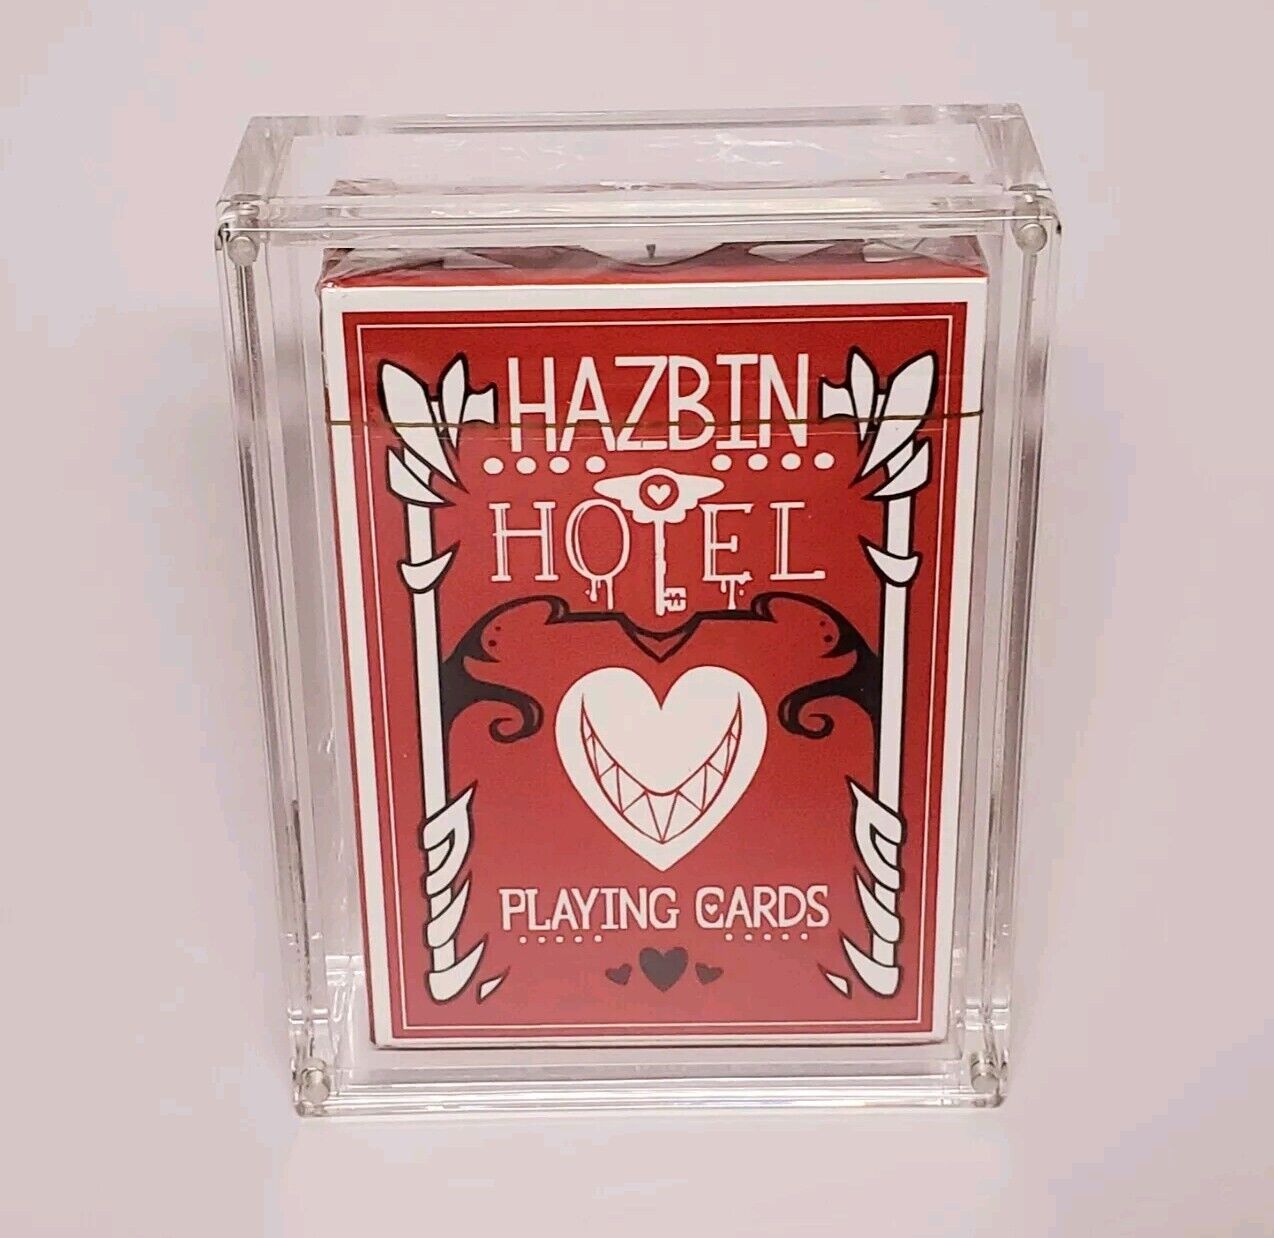 Hazbin Hotel Official Playing Cards Deck - BRAND NEW/SEALED - W/ DISPLAY CASE